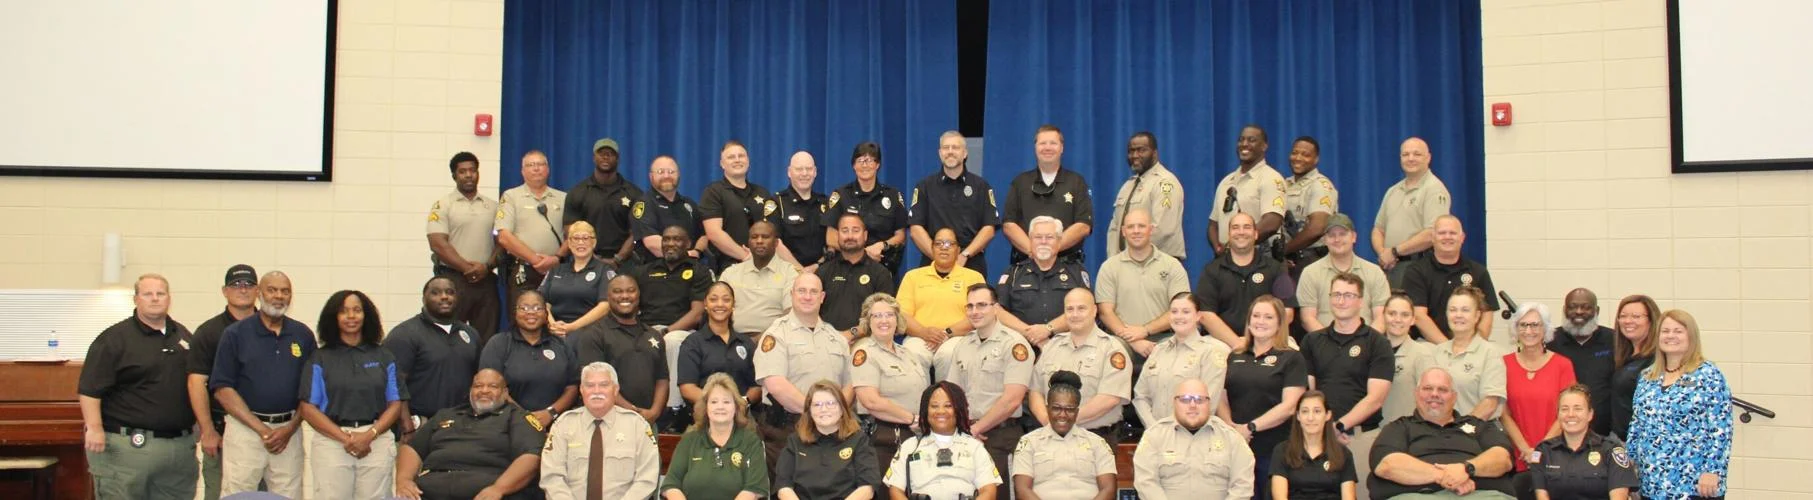 REUNITED AND IT FEELS SO GOOD: The D.A.R.E. resource officers posed for a group photo during their opening ceremony and reception on Monday afternoon.